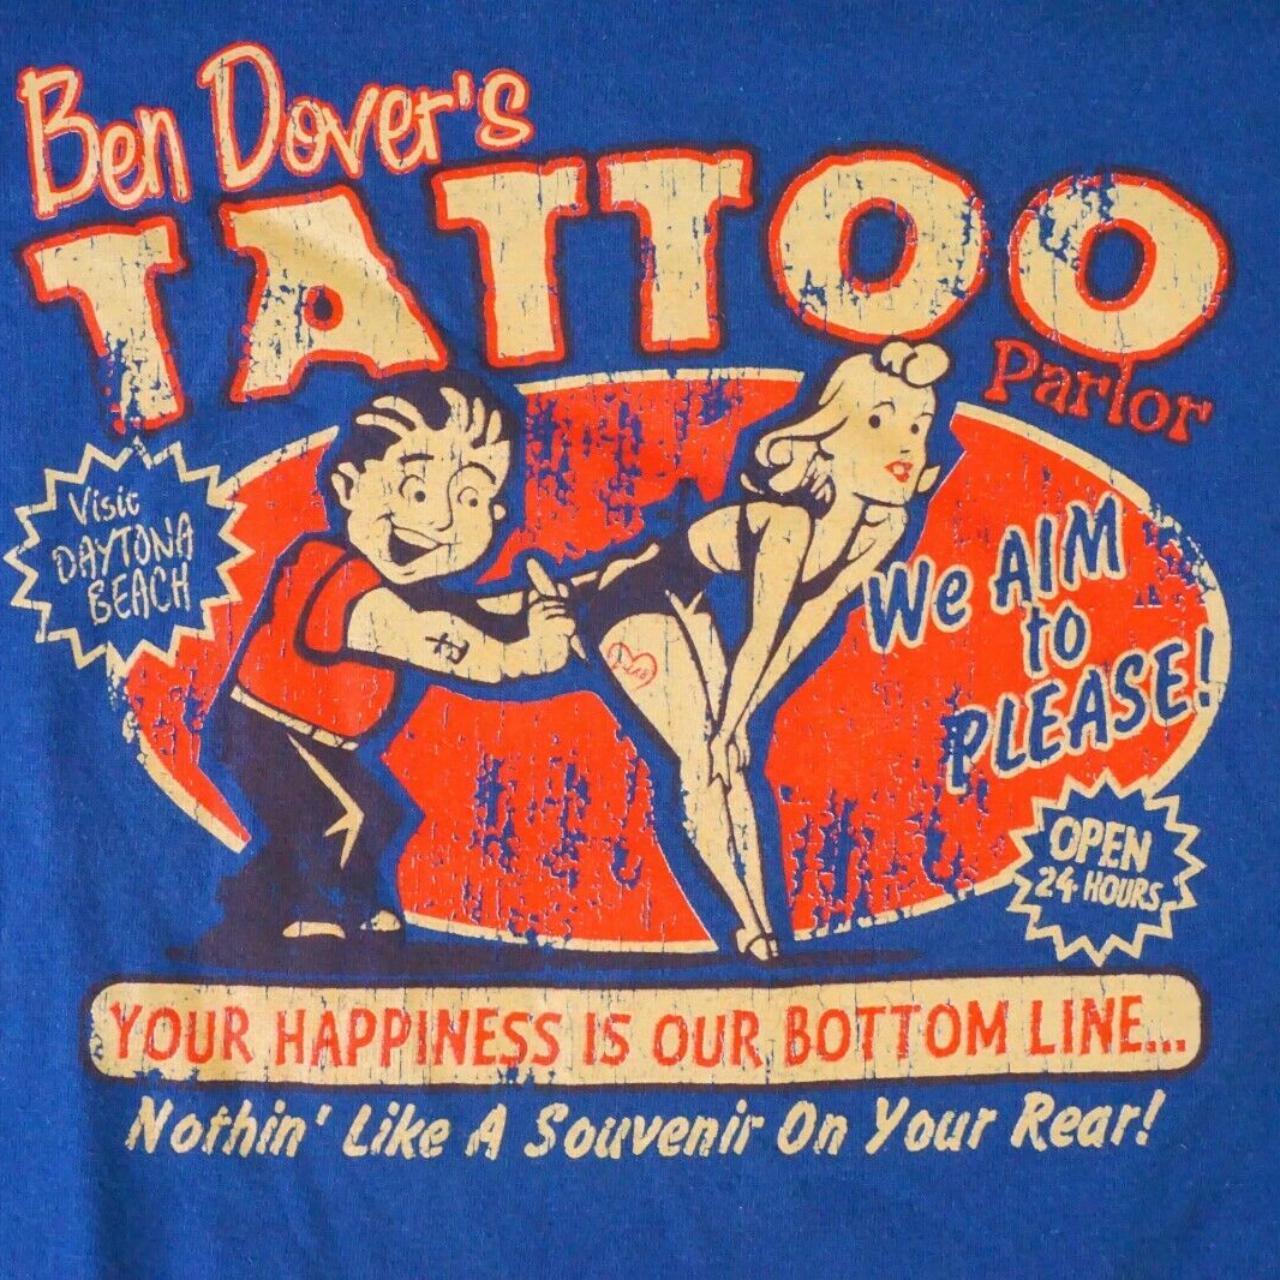 Product Image 2 - Vintage Ben Dover Tattoo Parlor